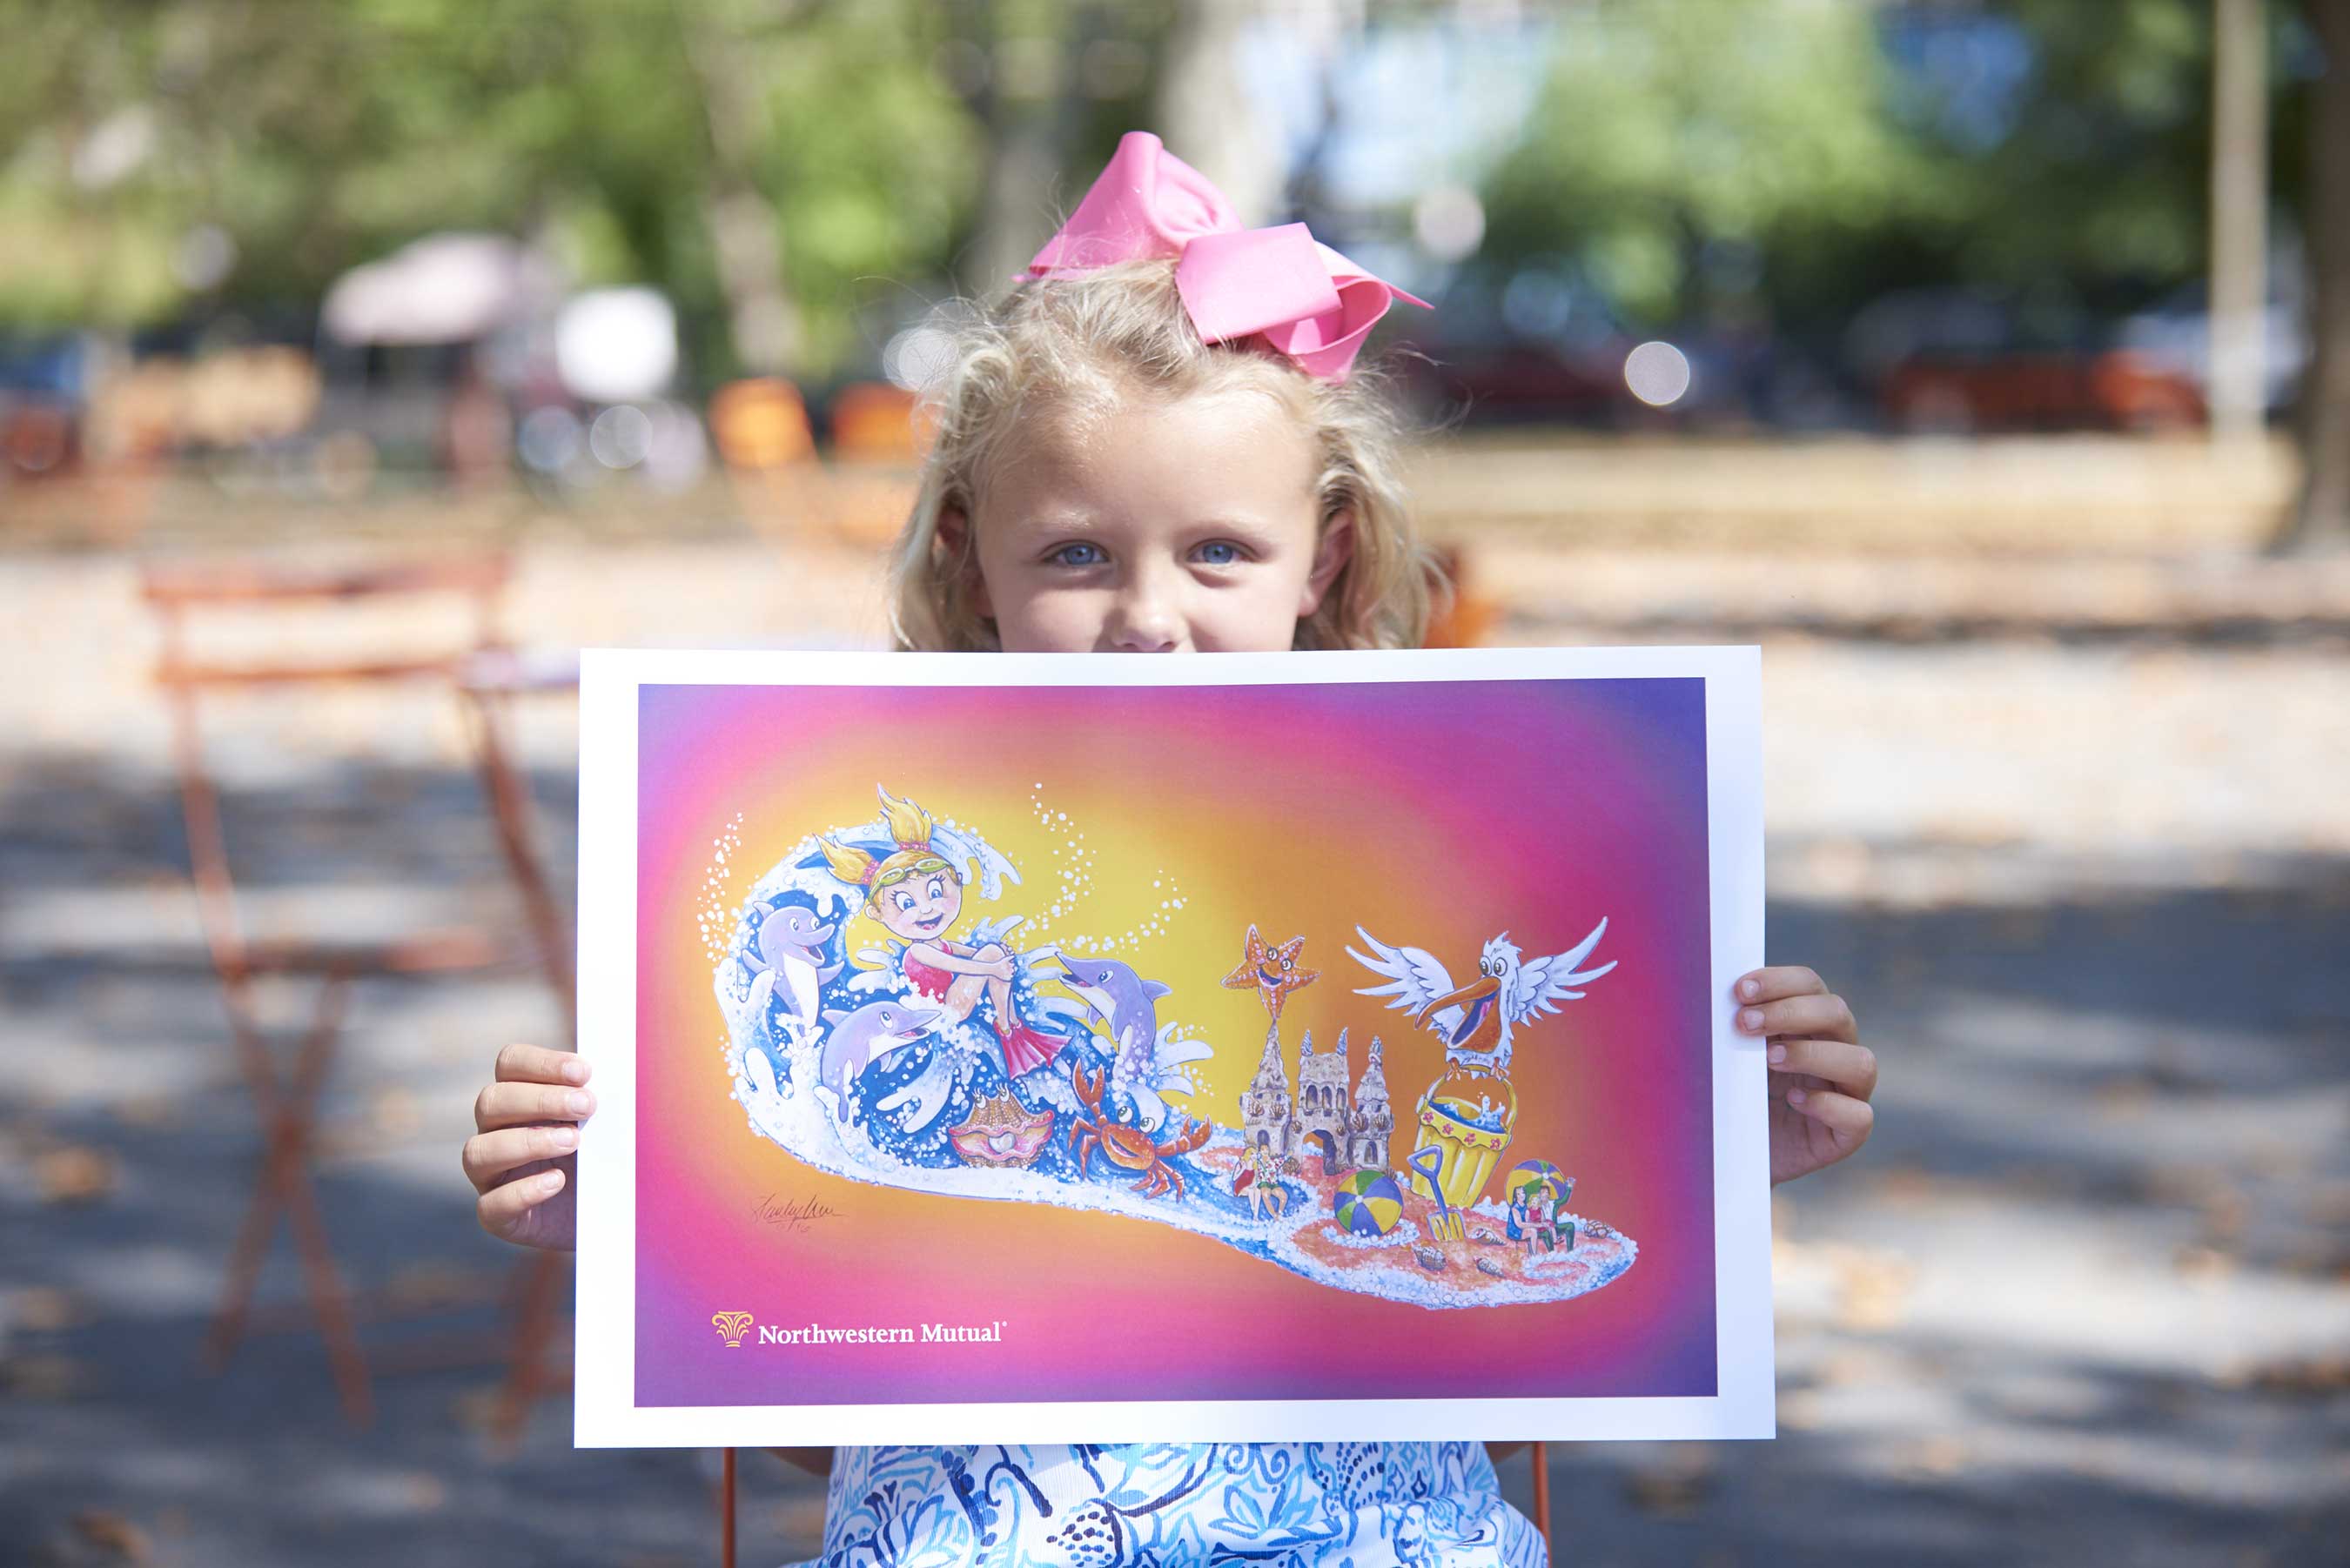 Edie Gilger, 7, displays the rendering of “Waves of Hope,” Northwestern Mutual’s float in the 2017 Rose Parade®. The design was inspired by Edie’s cancer fight and she will ride the float alongside her parents, oncologist and others.